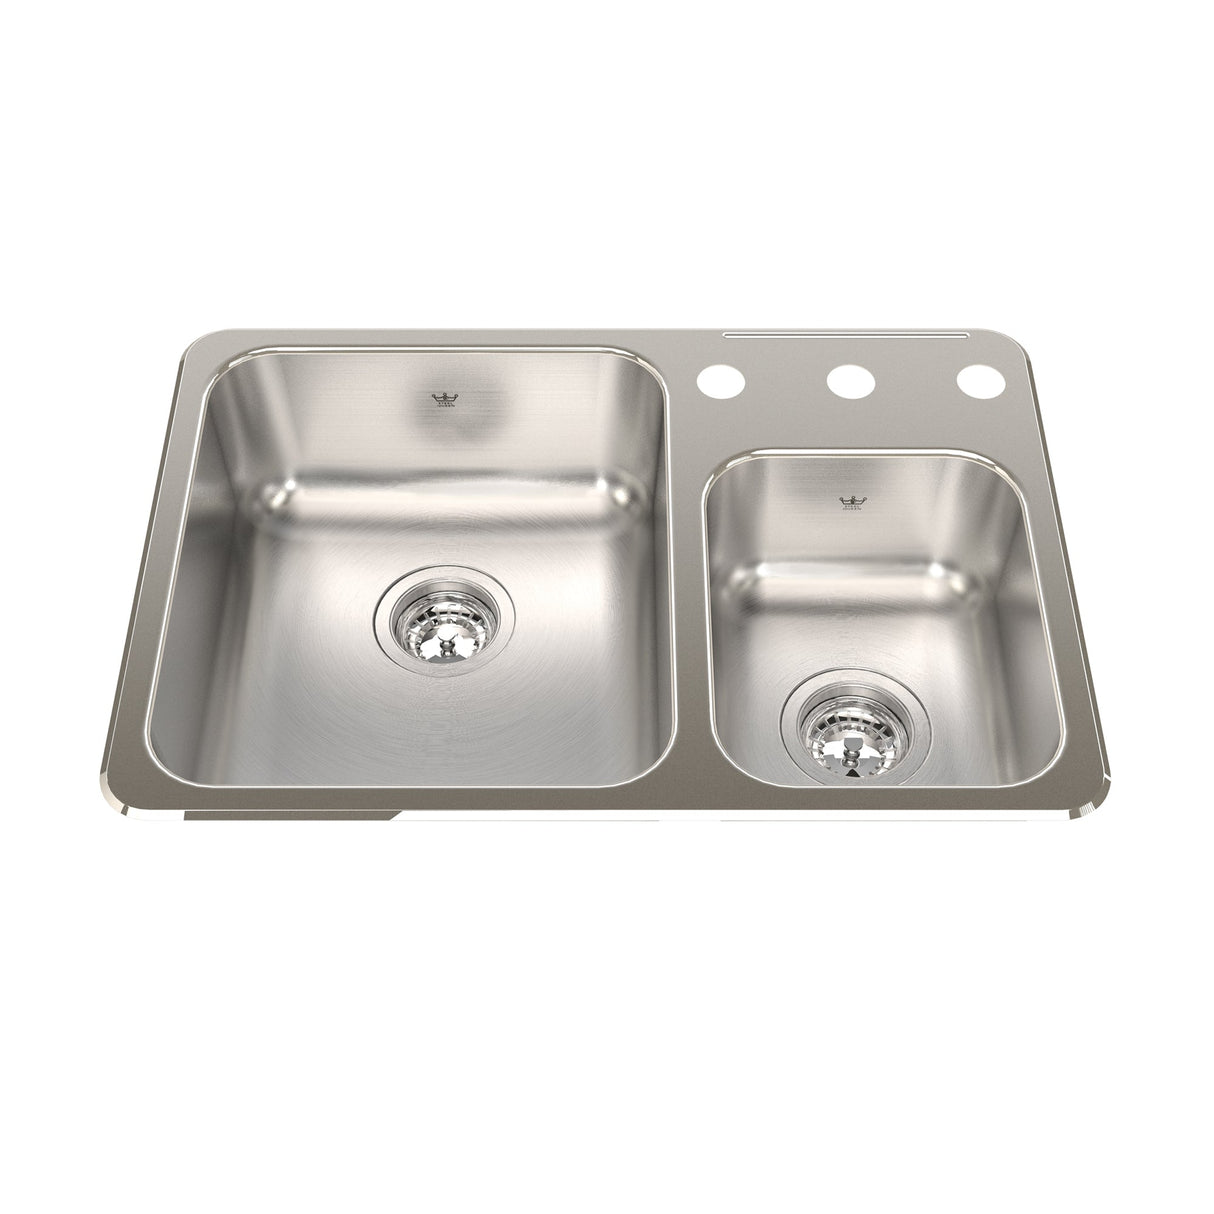 KINDRED QCMA1826-7-3N Steel Queen 26.5-in LR x 18.13-in FB x 7-in DP Drop In Double Bowl 3-Hole Stainless Steel Kitchen Sink In Satin Finished Bowls with Mirror Finished Rim